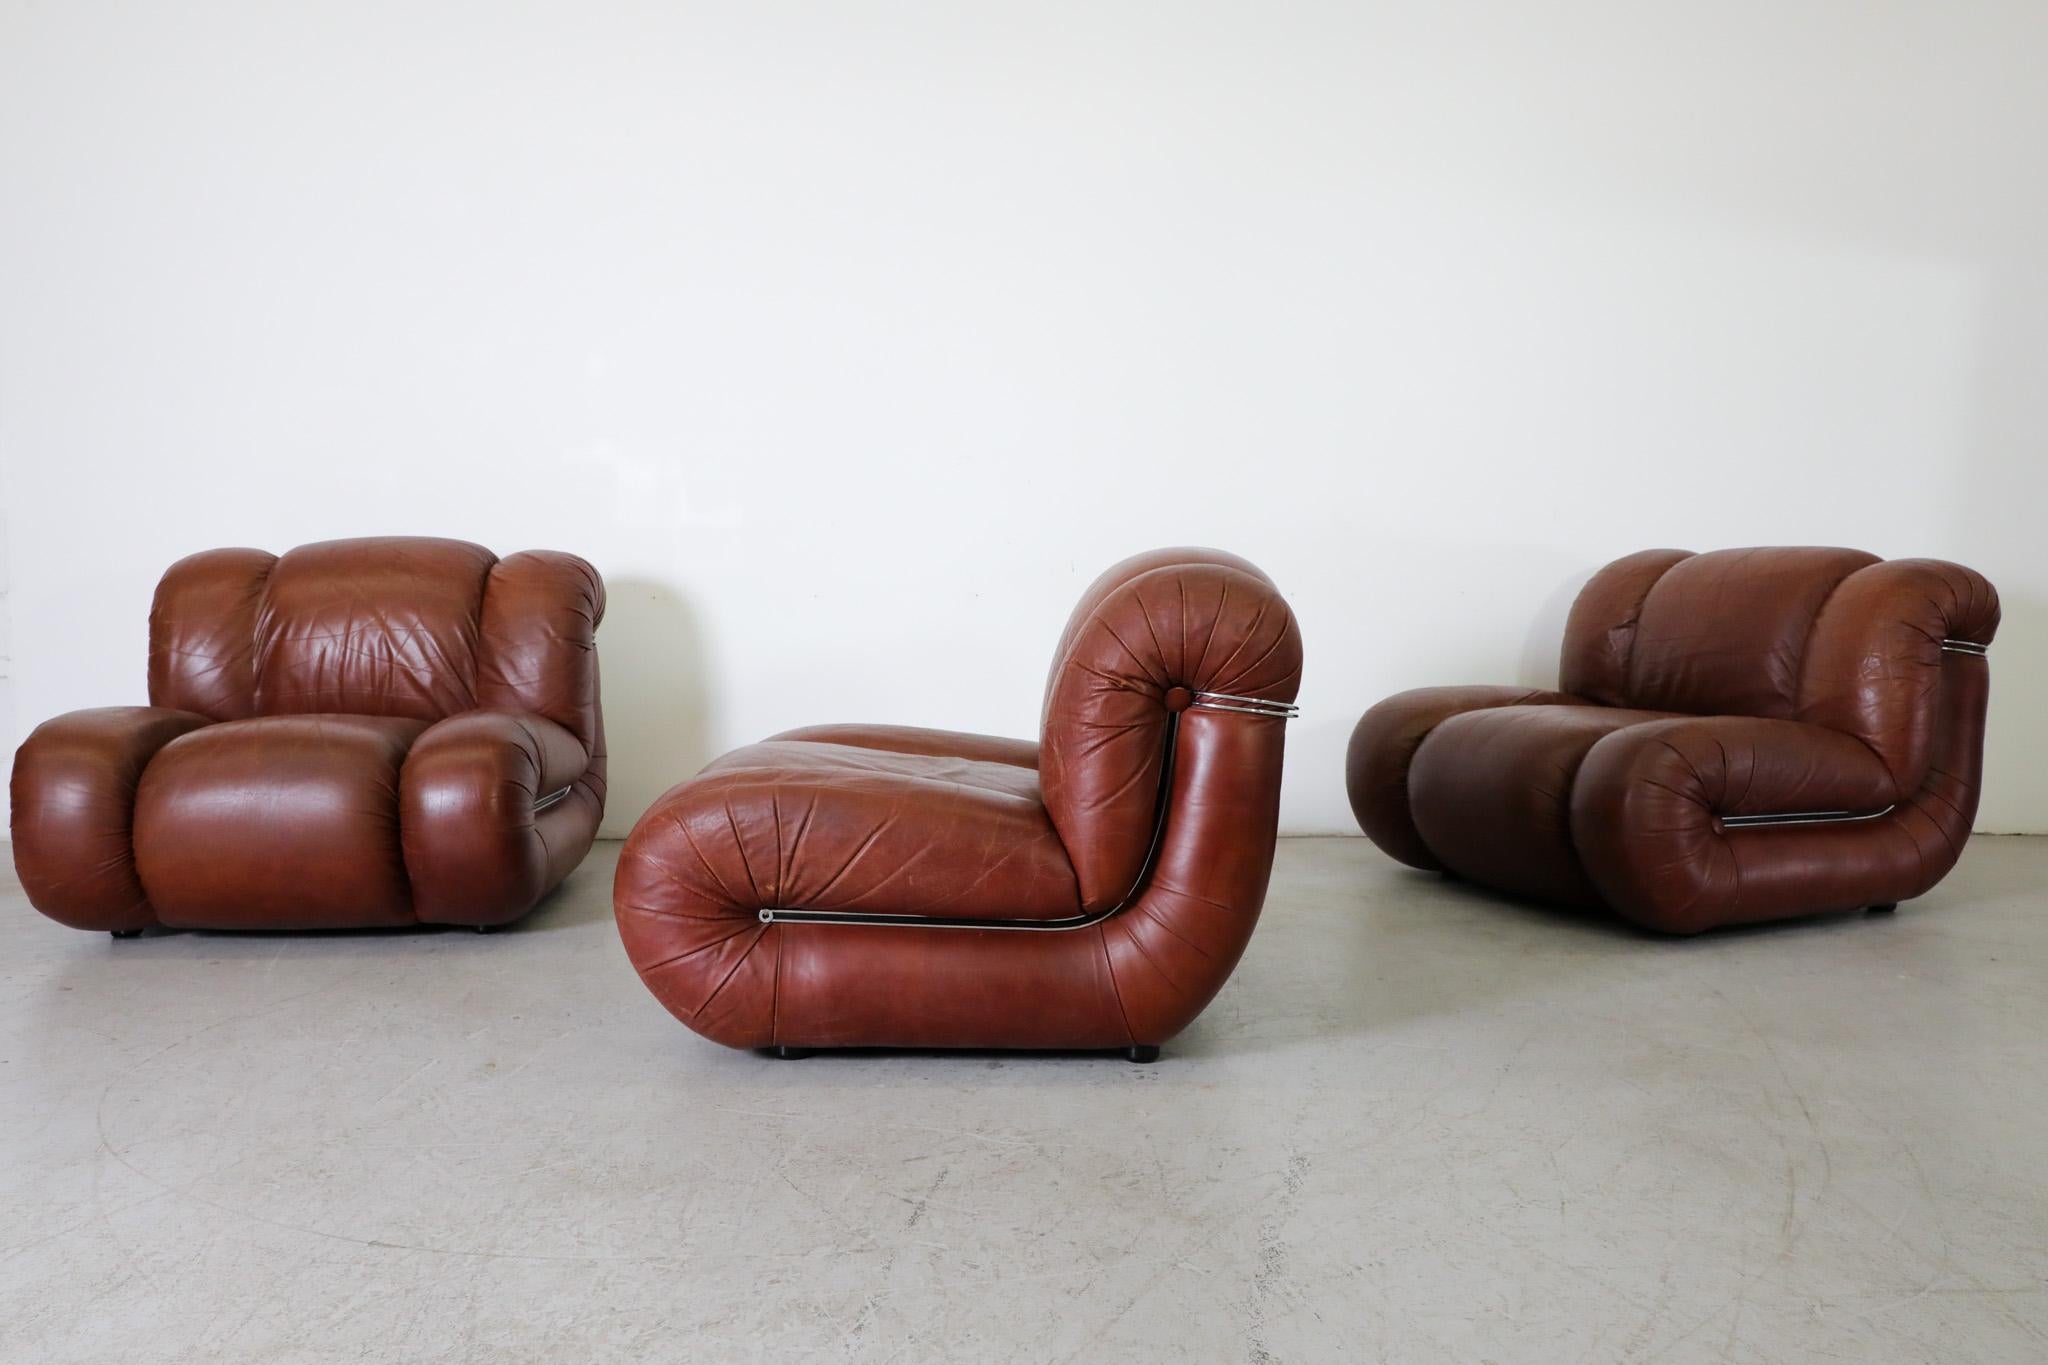 Mimo Padova Velasquez Modular Sofa In Brown Leather And Chrome, Italy 1970s For Sale 3